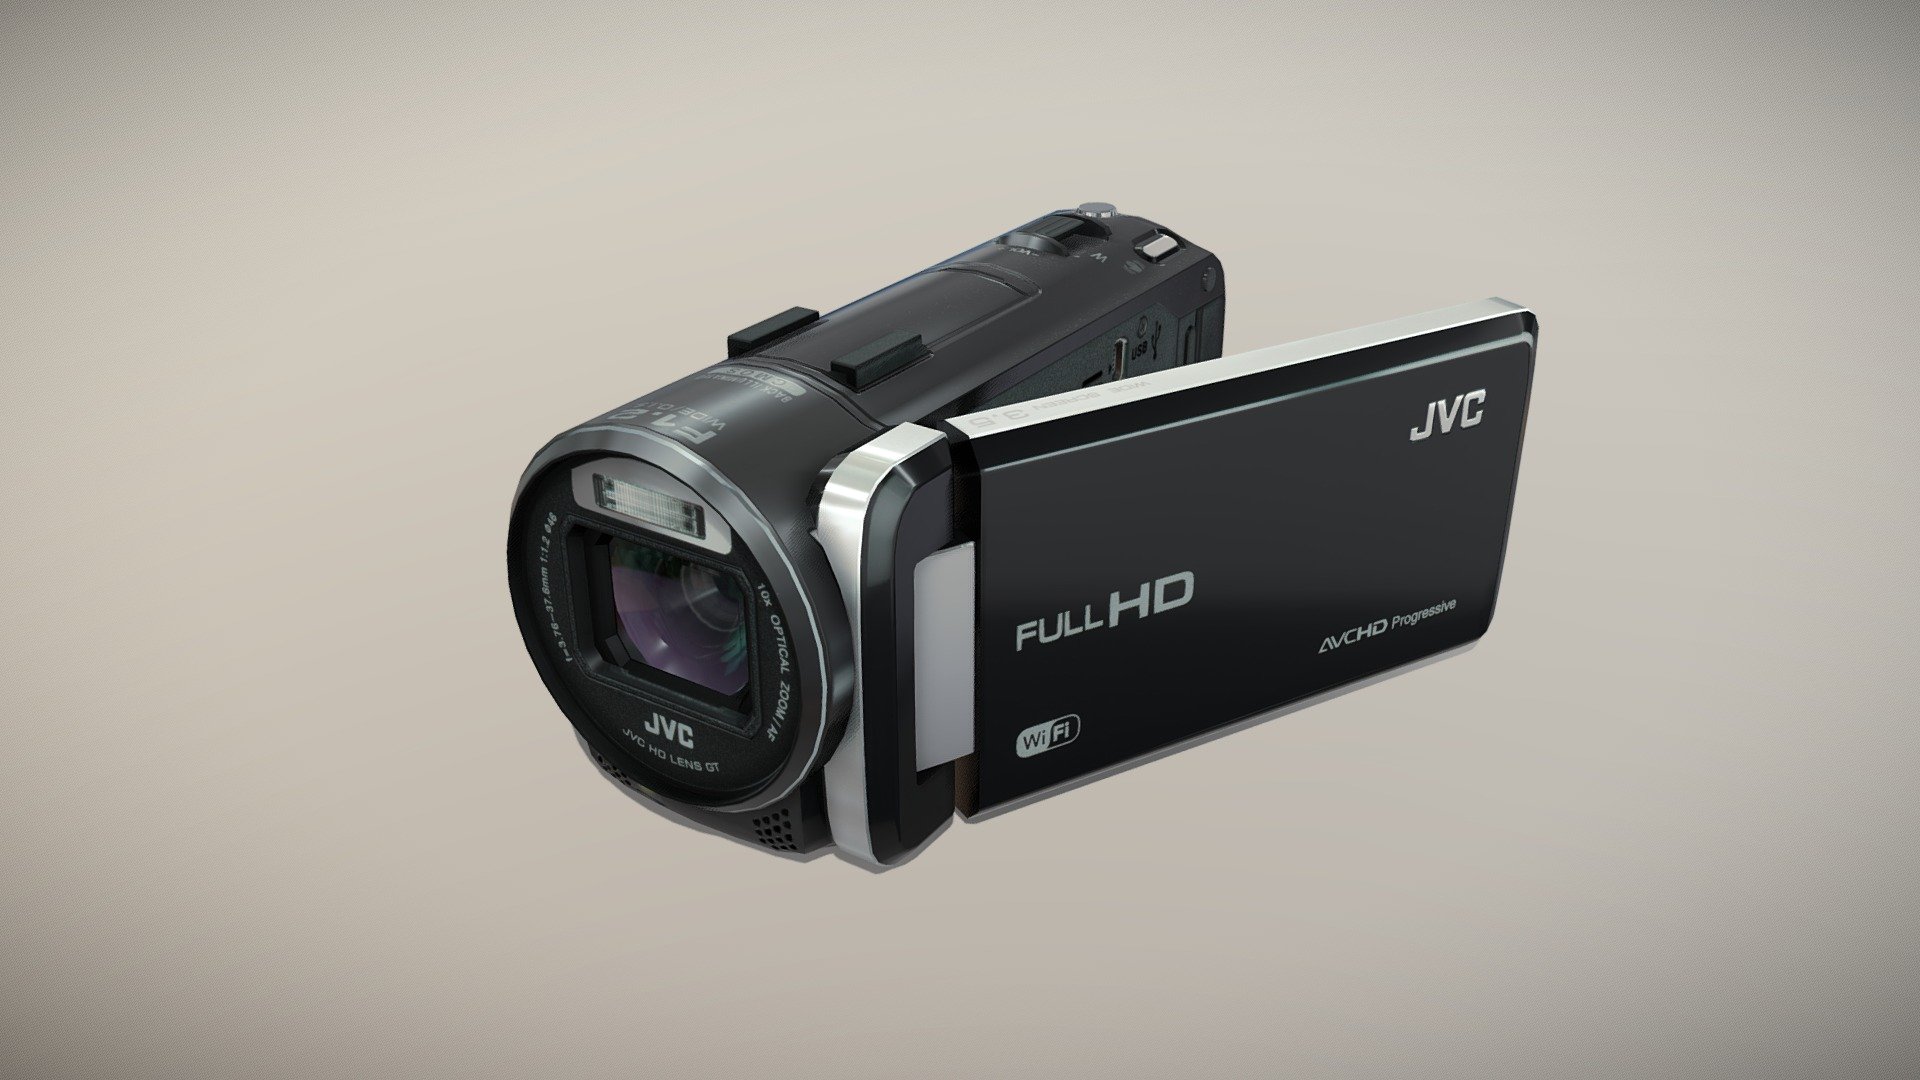 •   Let me present to you high-quality low-poly 3D model JVC GZ-GX1 Black. Modeling was made with ortho-photos of real camcorder that is why all details of design are recreated most authentically.

•    This model consists of a few meshes, it is low-polygonal and it has three materials (for Body, Belt and Glass of Lens).

•   The total of the main textures is 7. Resolution of all textures is 4096 pixels square aspect ratio in .png format. Also there is original texture file .PSD format in separate archive.

•   Polygon count of the model is – 5631.

•   The model has correct dimensions in real-world scale. All parts grouped and named correctly.

•   To use the model in other 3D programs there are scenes saved in formats .fbx, .obj, .DAE, .max (2010 version).

Note: If you see some artifacts on the textures, it means compression works in the Viewer. We recommend setting HD quality for textures. But anyway, original textures have no artifacts 3d model